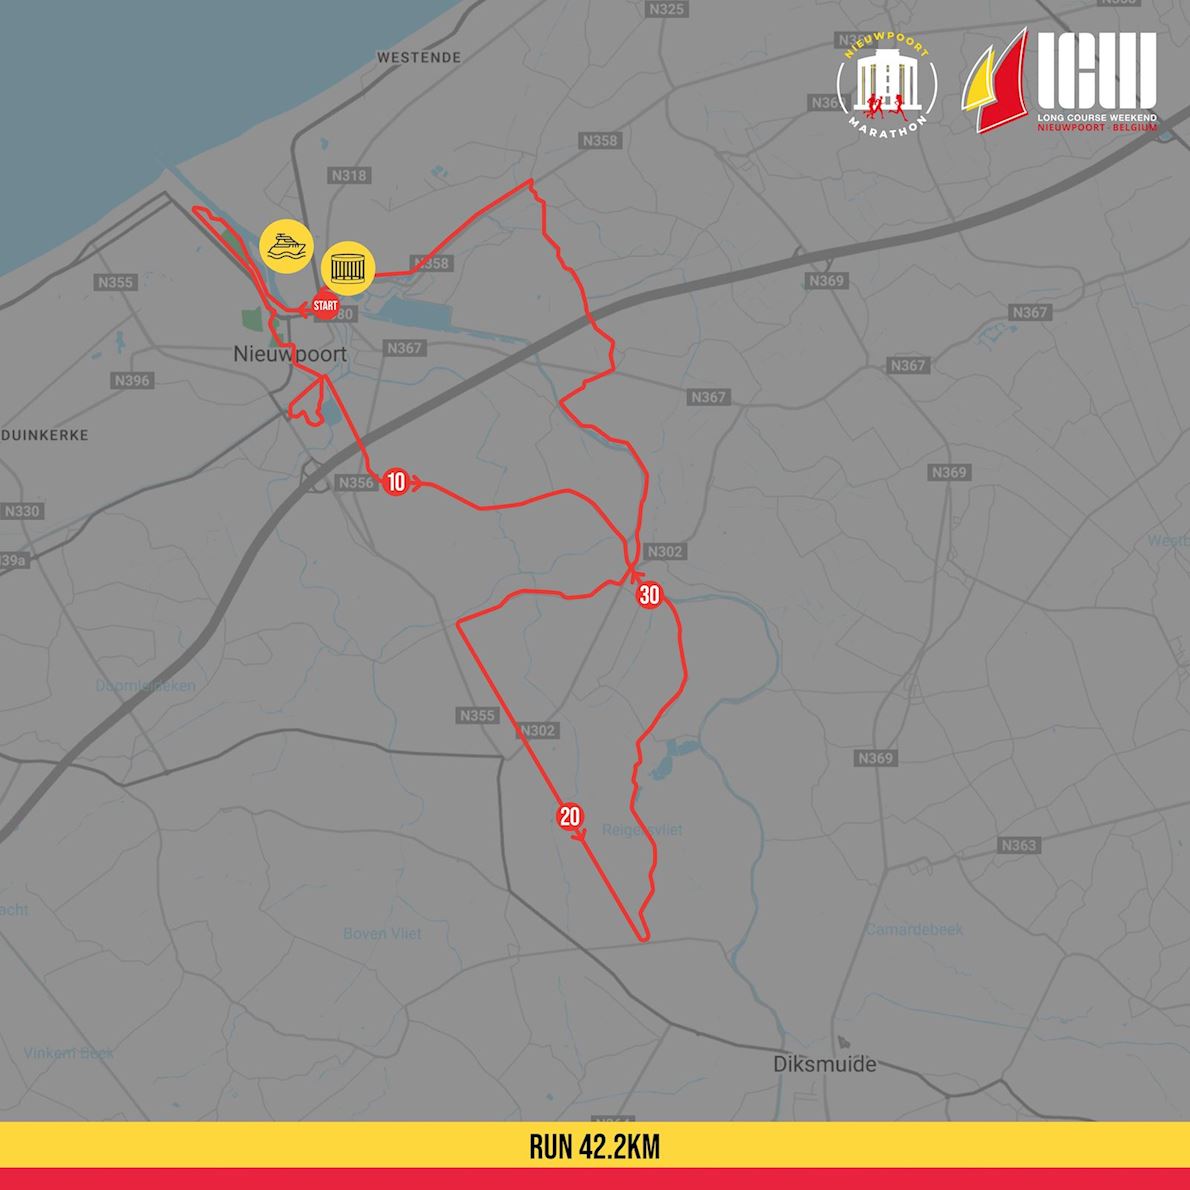 Long Course Weekend Belgium Route Map